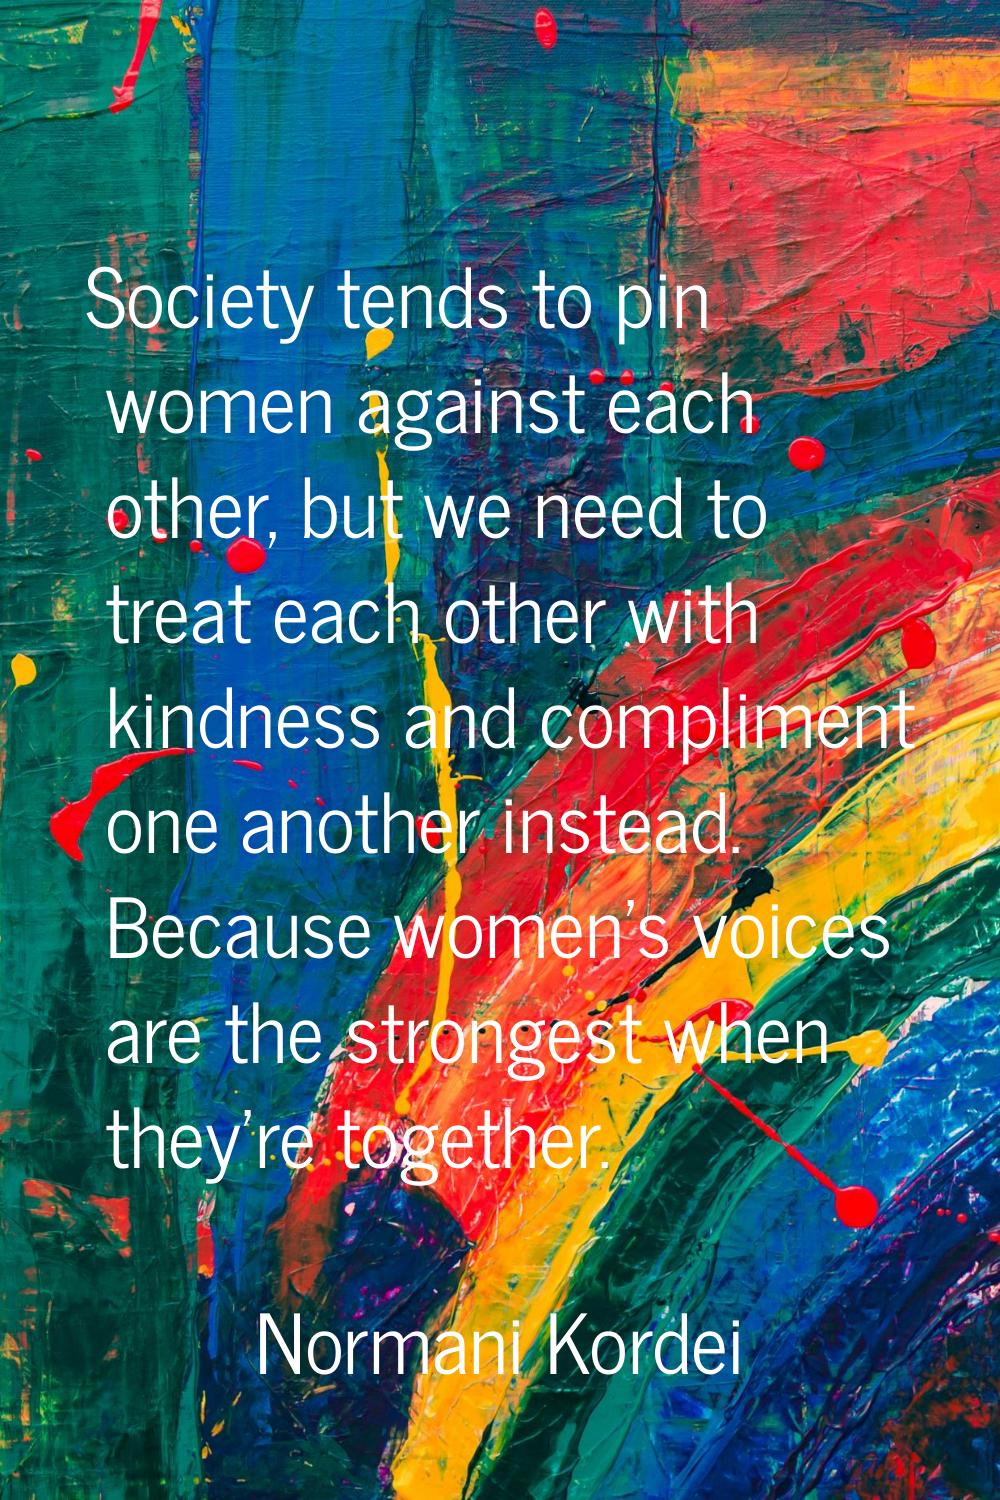 Society tends to pin women against each other, but we need to treat each other with kindness and co